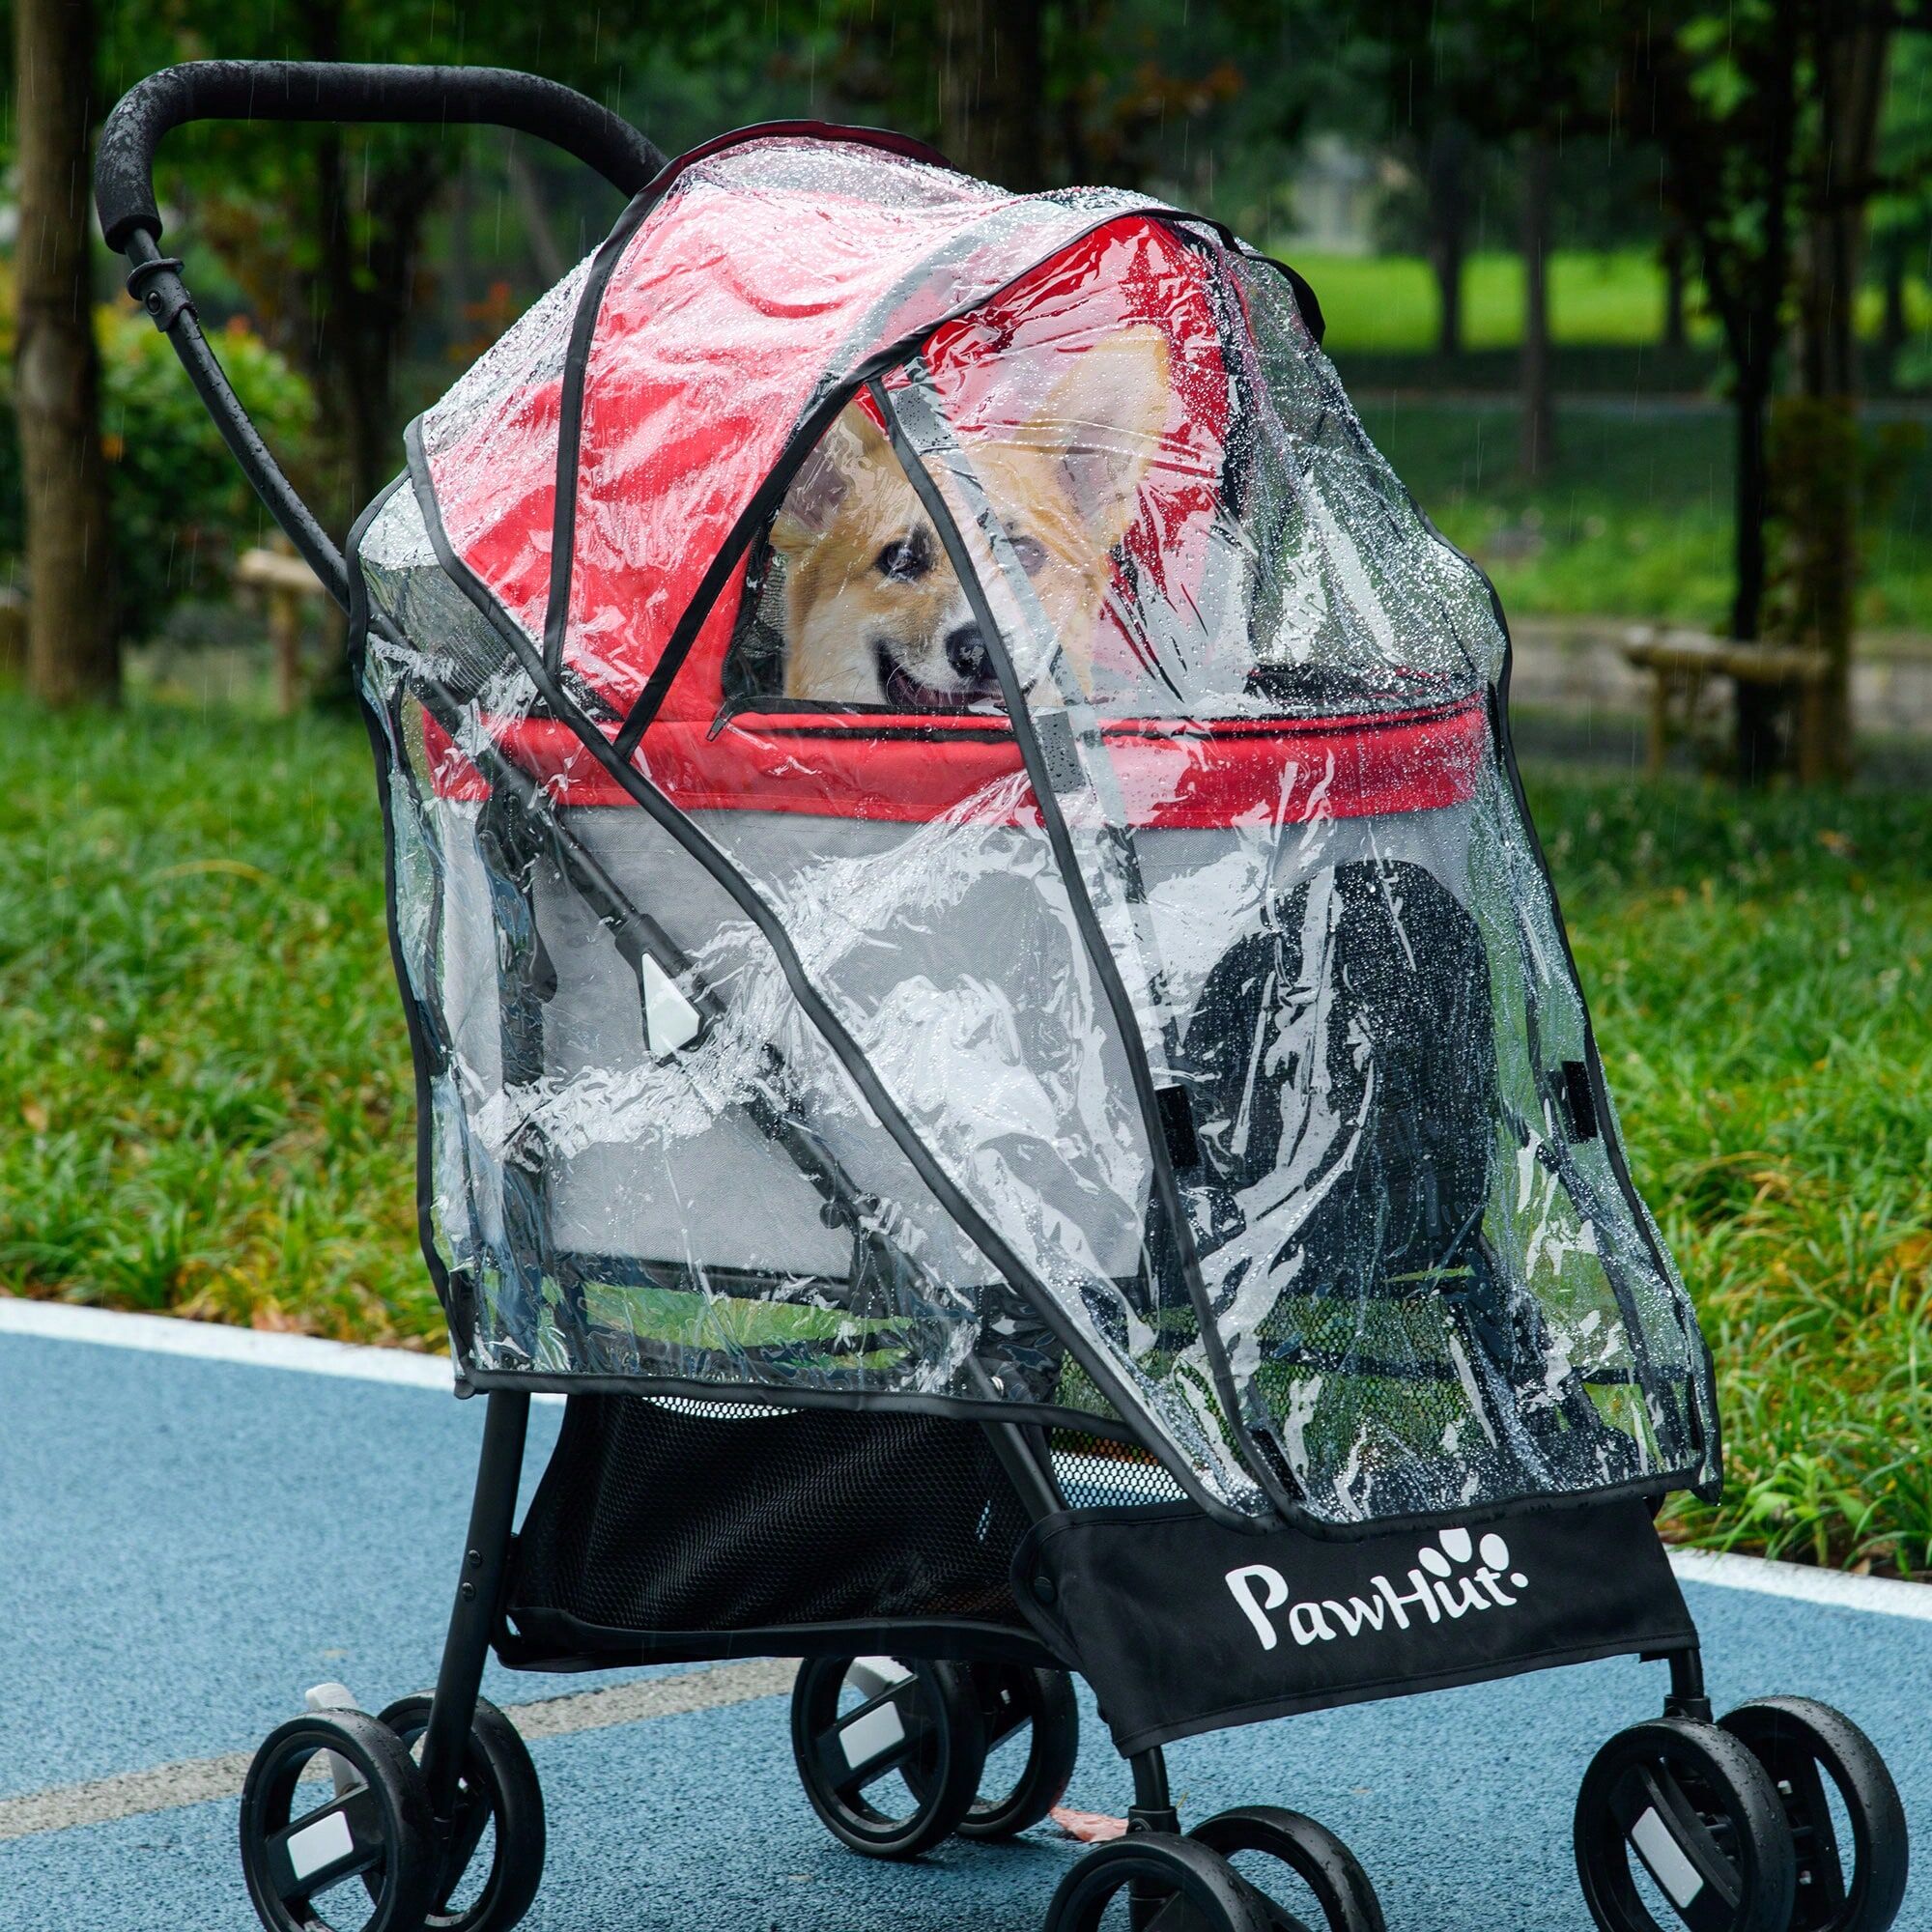 SHEIN PawHut Dog Pram Rain Cover, Cover For Dog Stroller Buggy, With Front, Rear Entry White